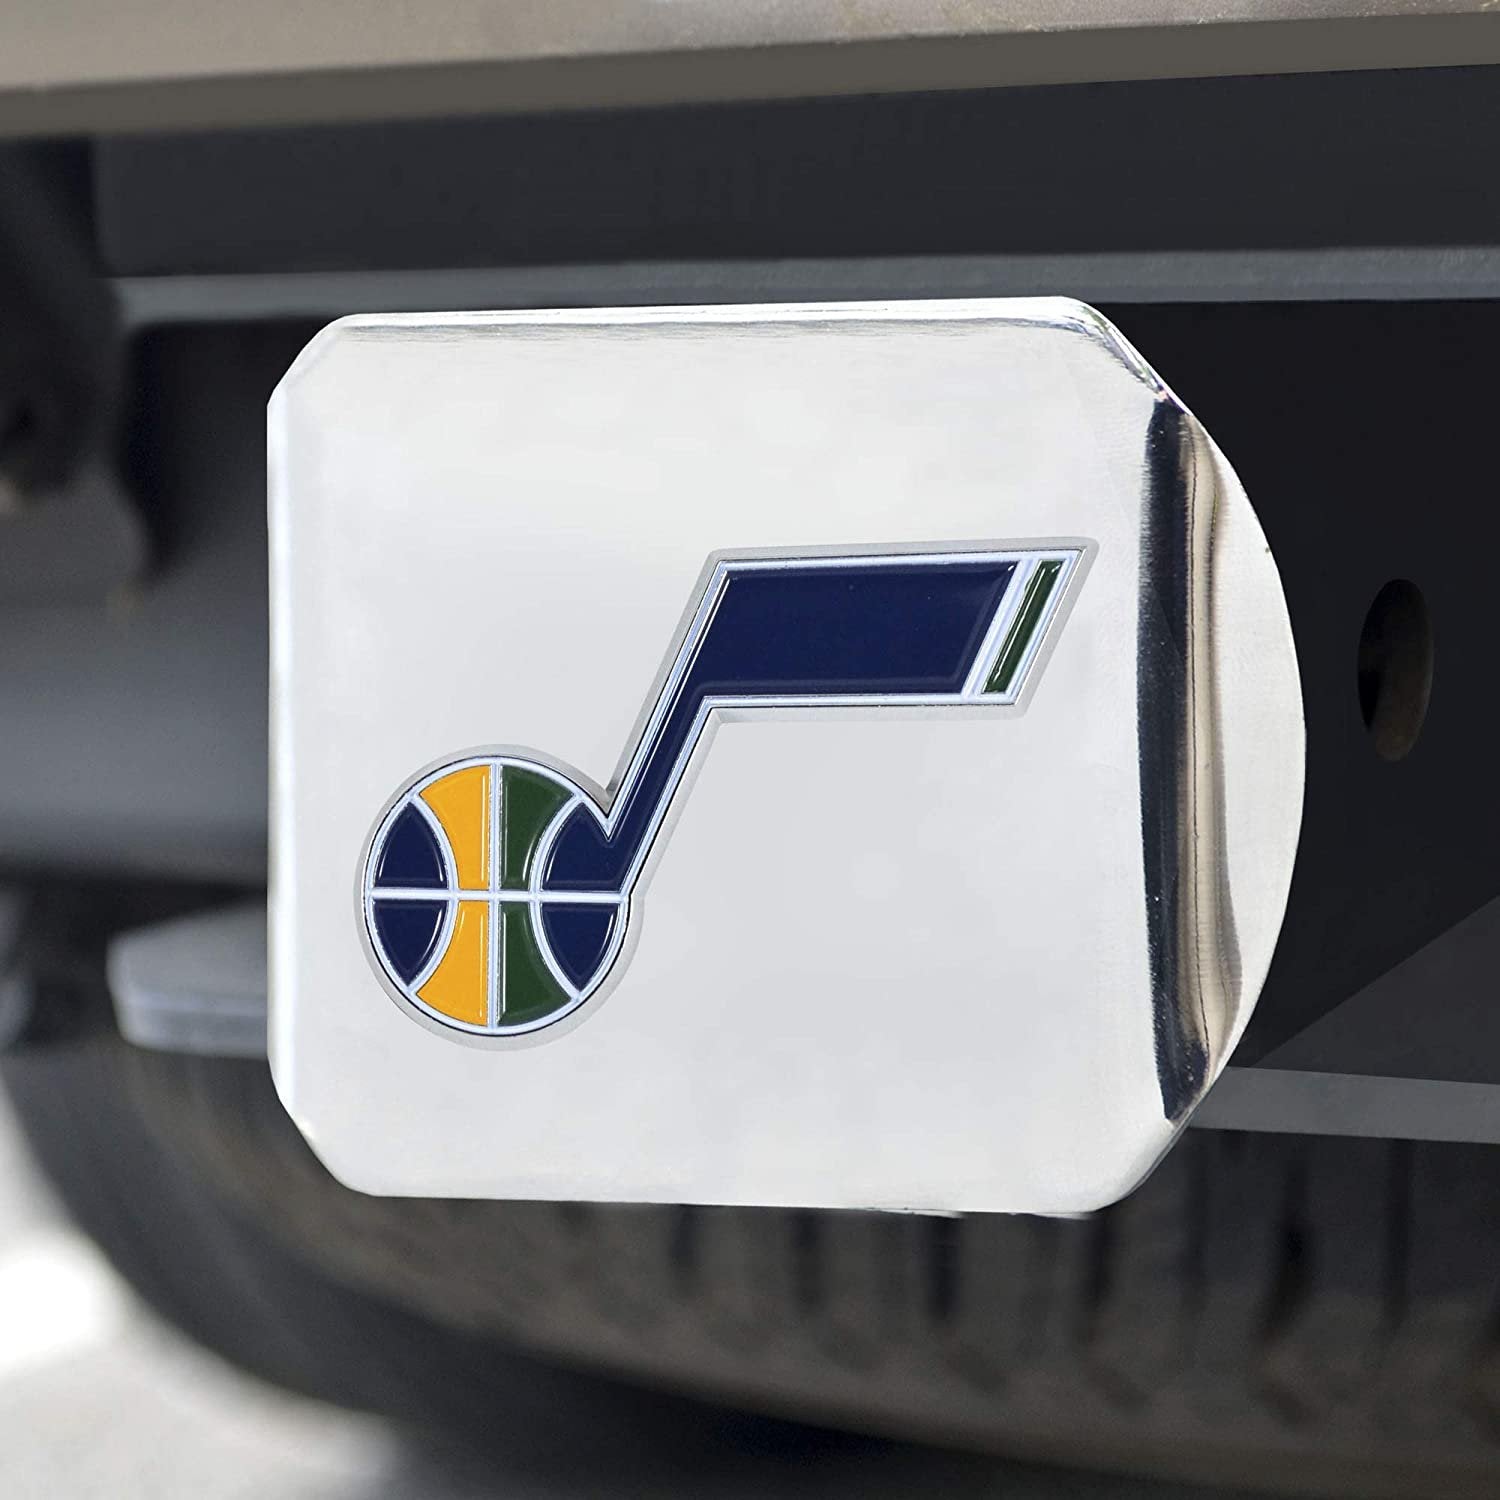 Utah Jazz Hitch Cover Solid Metal with Raised Color Metal Emblem 2" Square Type III